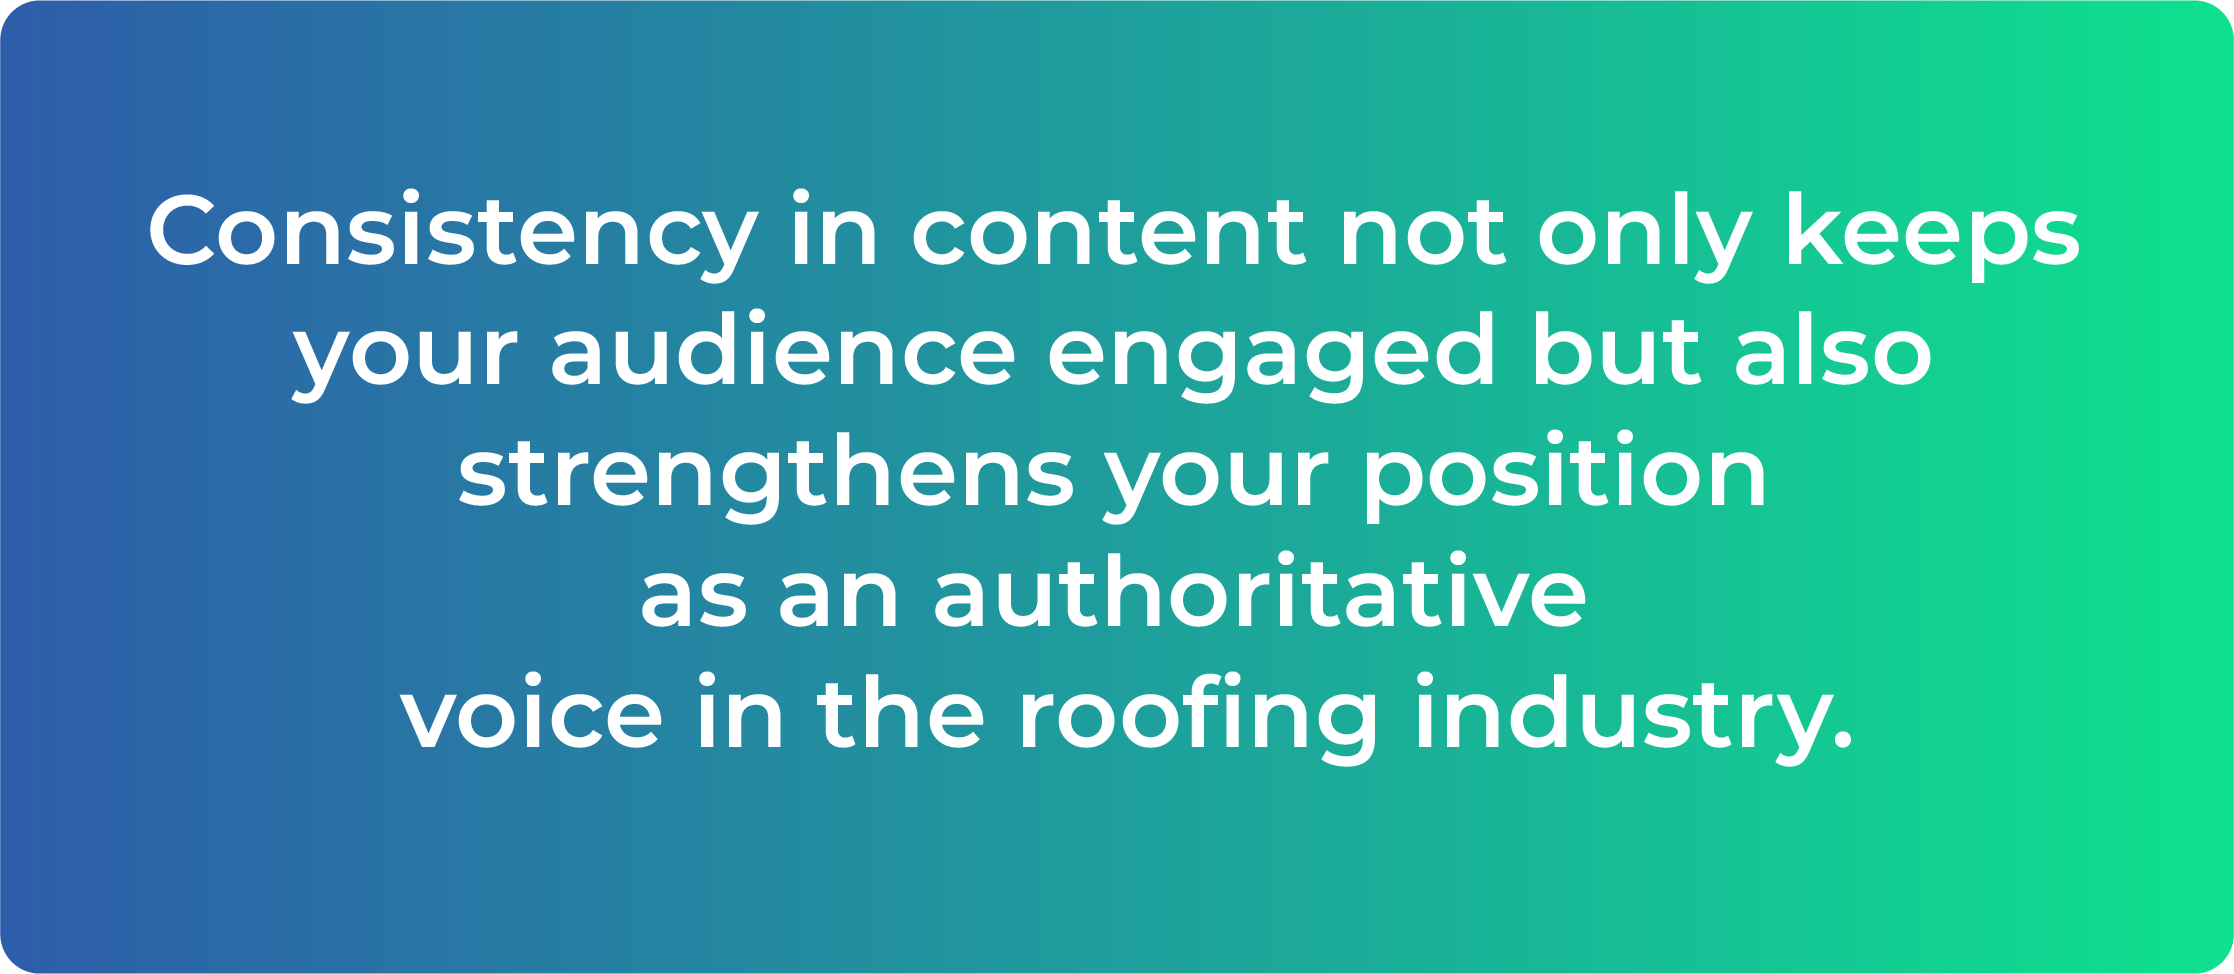 Consistency in content not only keeps your audience engaged but also strengthens your position as an authoritative voice in the roofing industry.